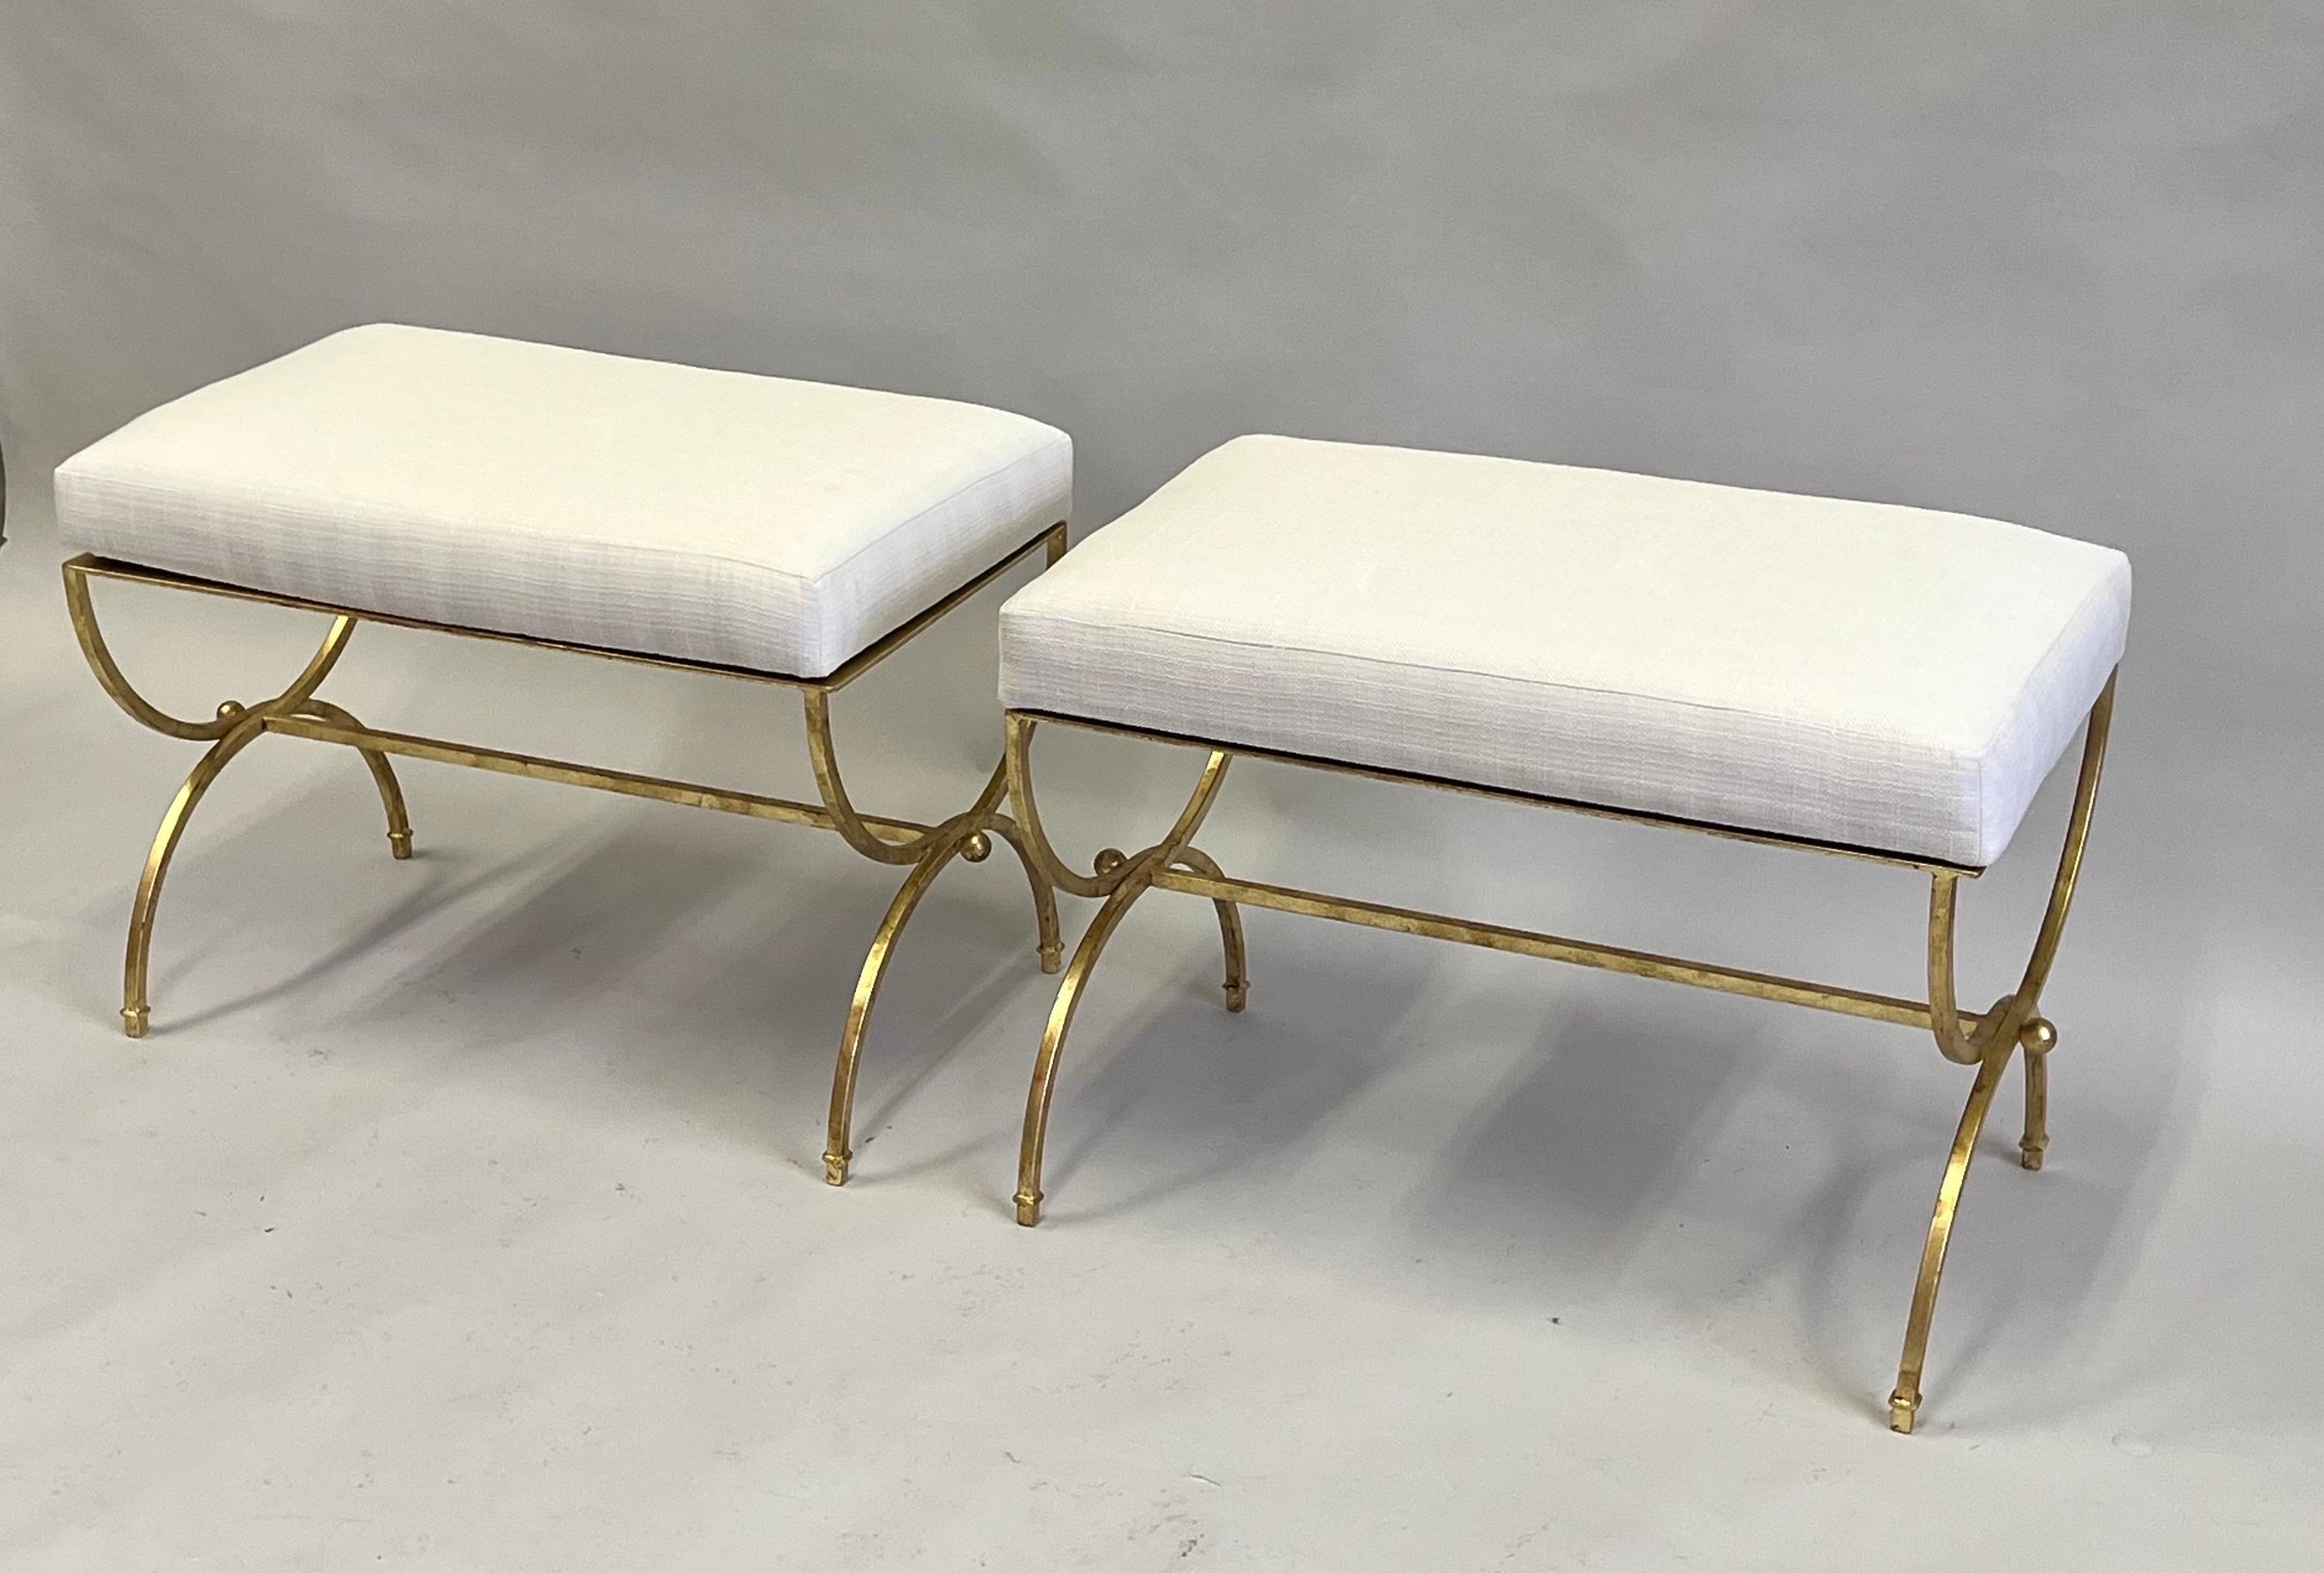 Elegant, Timeless Pair of French Mid-century, Modern neoclassical, hand made gilt wrought iron benches or stools in the style of Raymond Subes, France, 1930. The pieces are exquisitely detailed with a Curile, X frame leg design reminiscent of